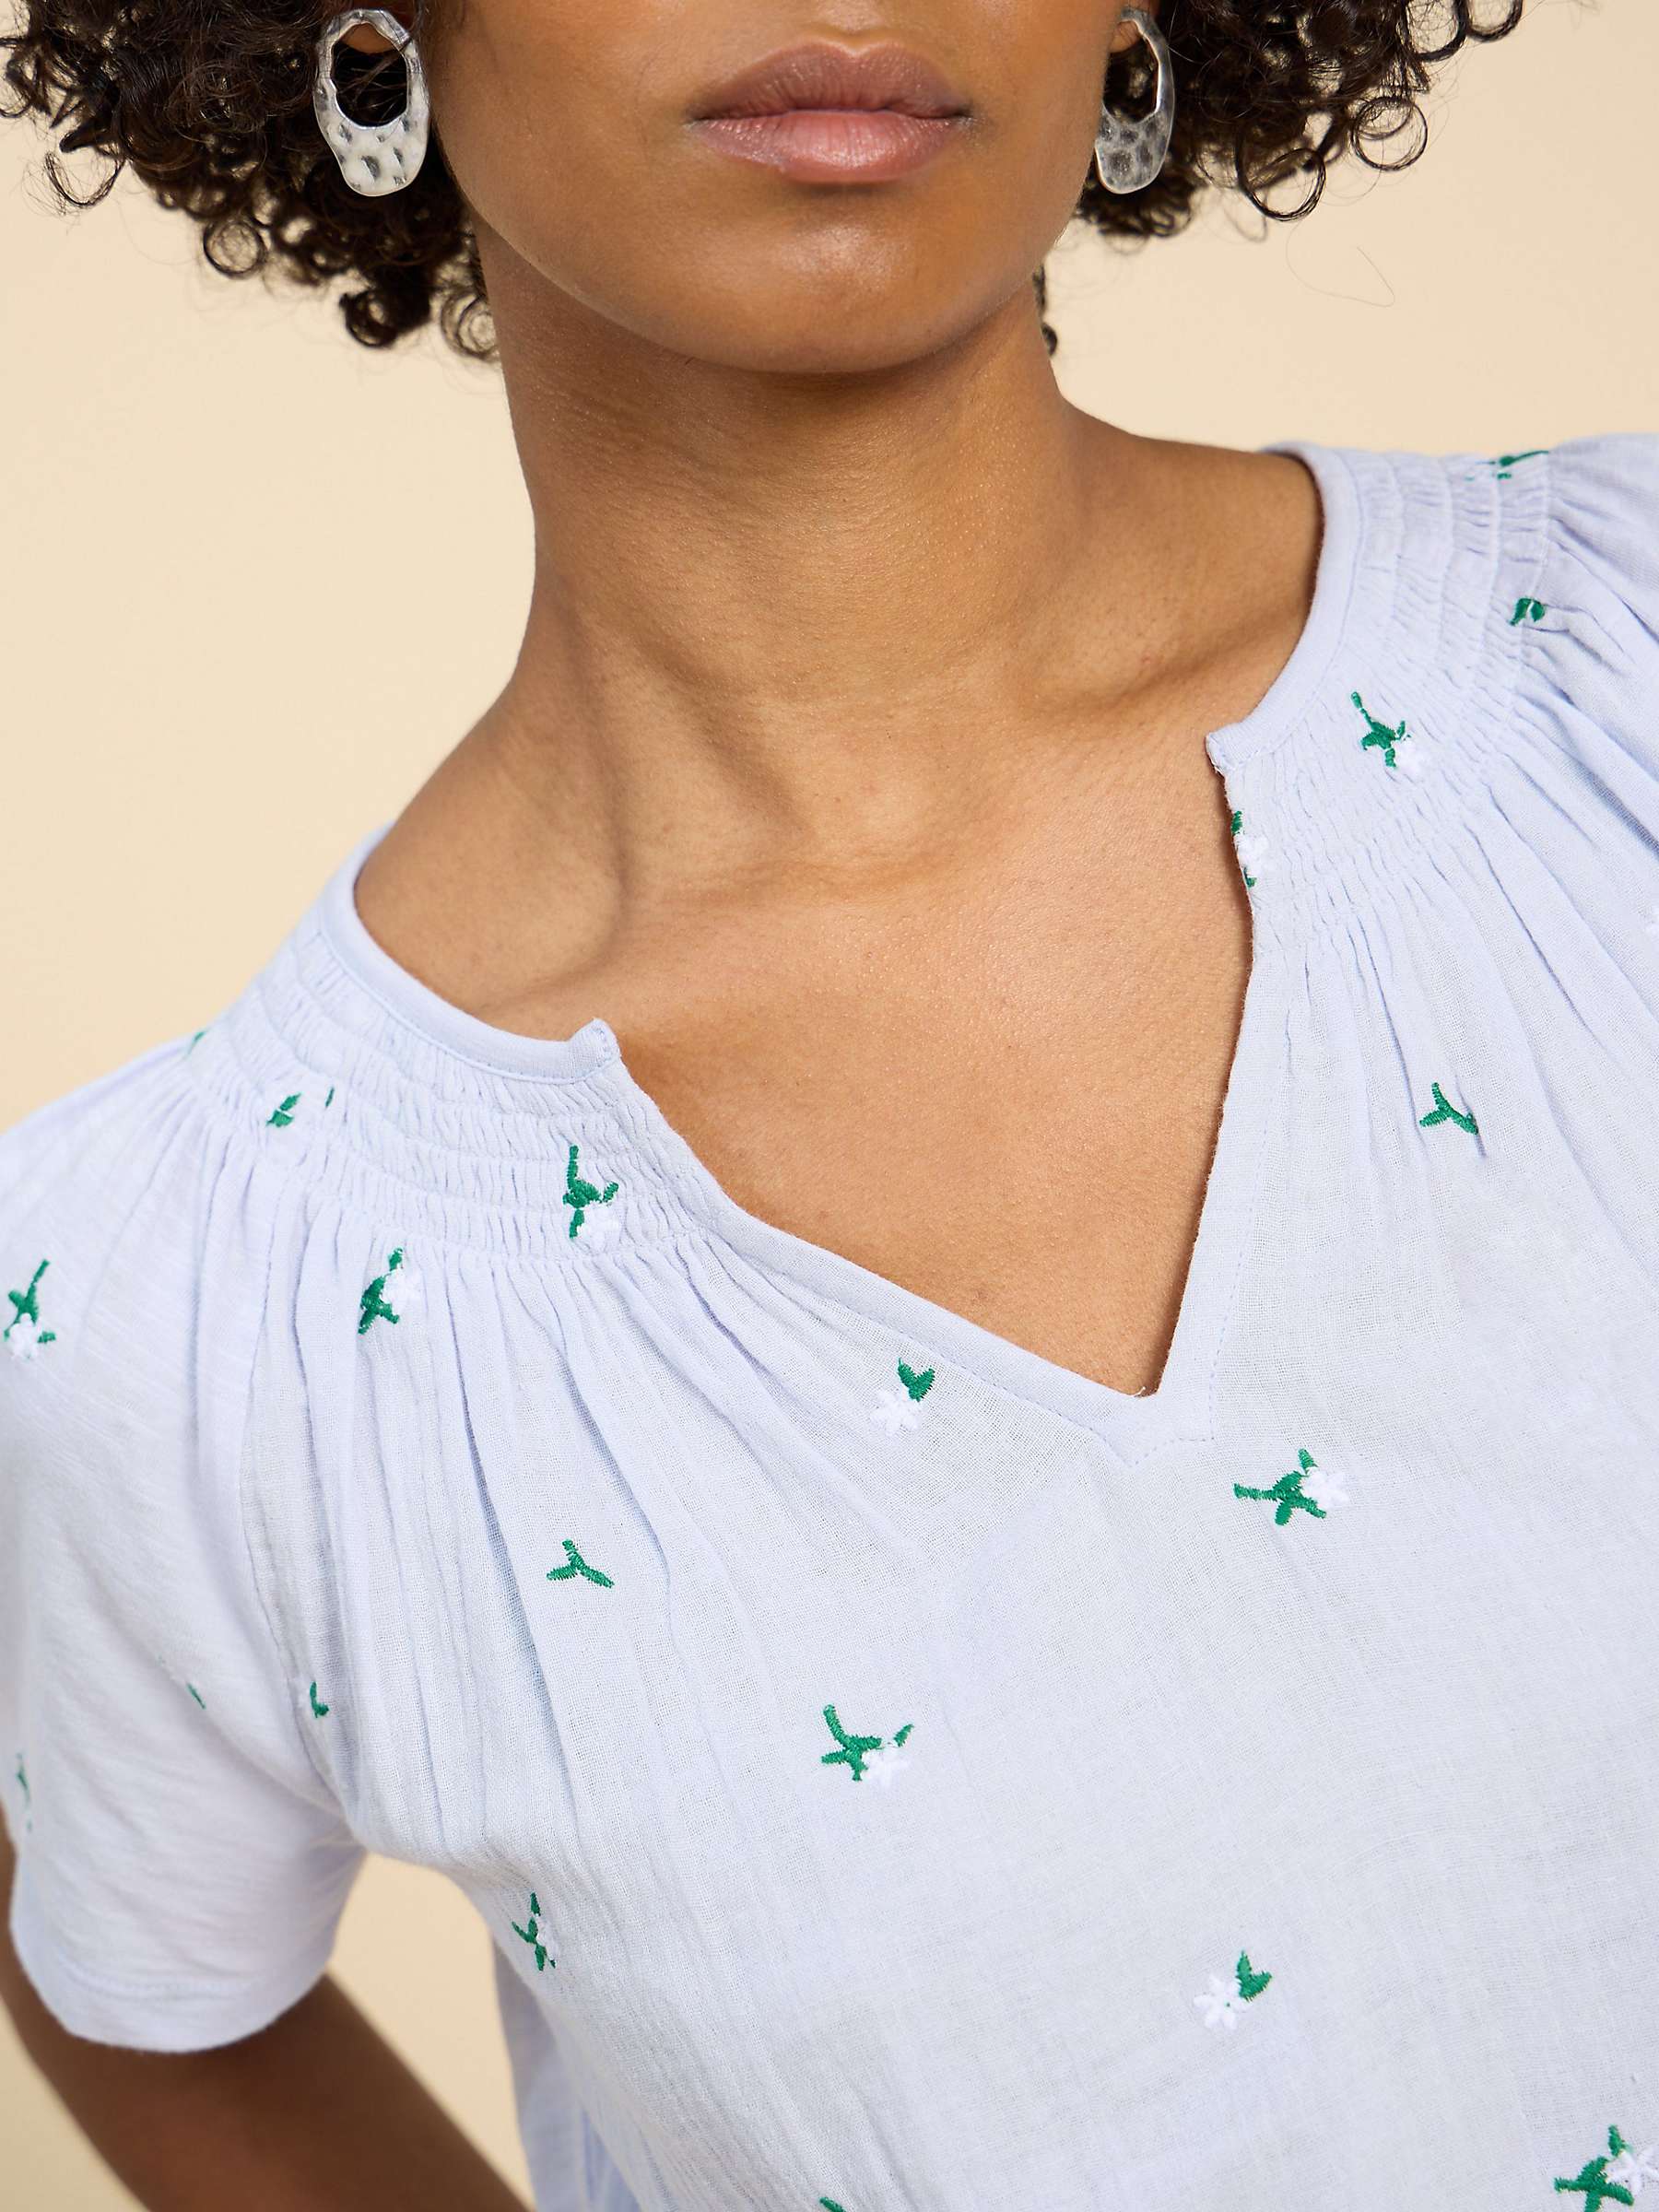 Buy White Stuff Luella Floral Embroidery Cotton T-Shirt, Mid Blue/Multi Online at johnlewis.com